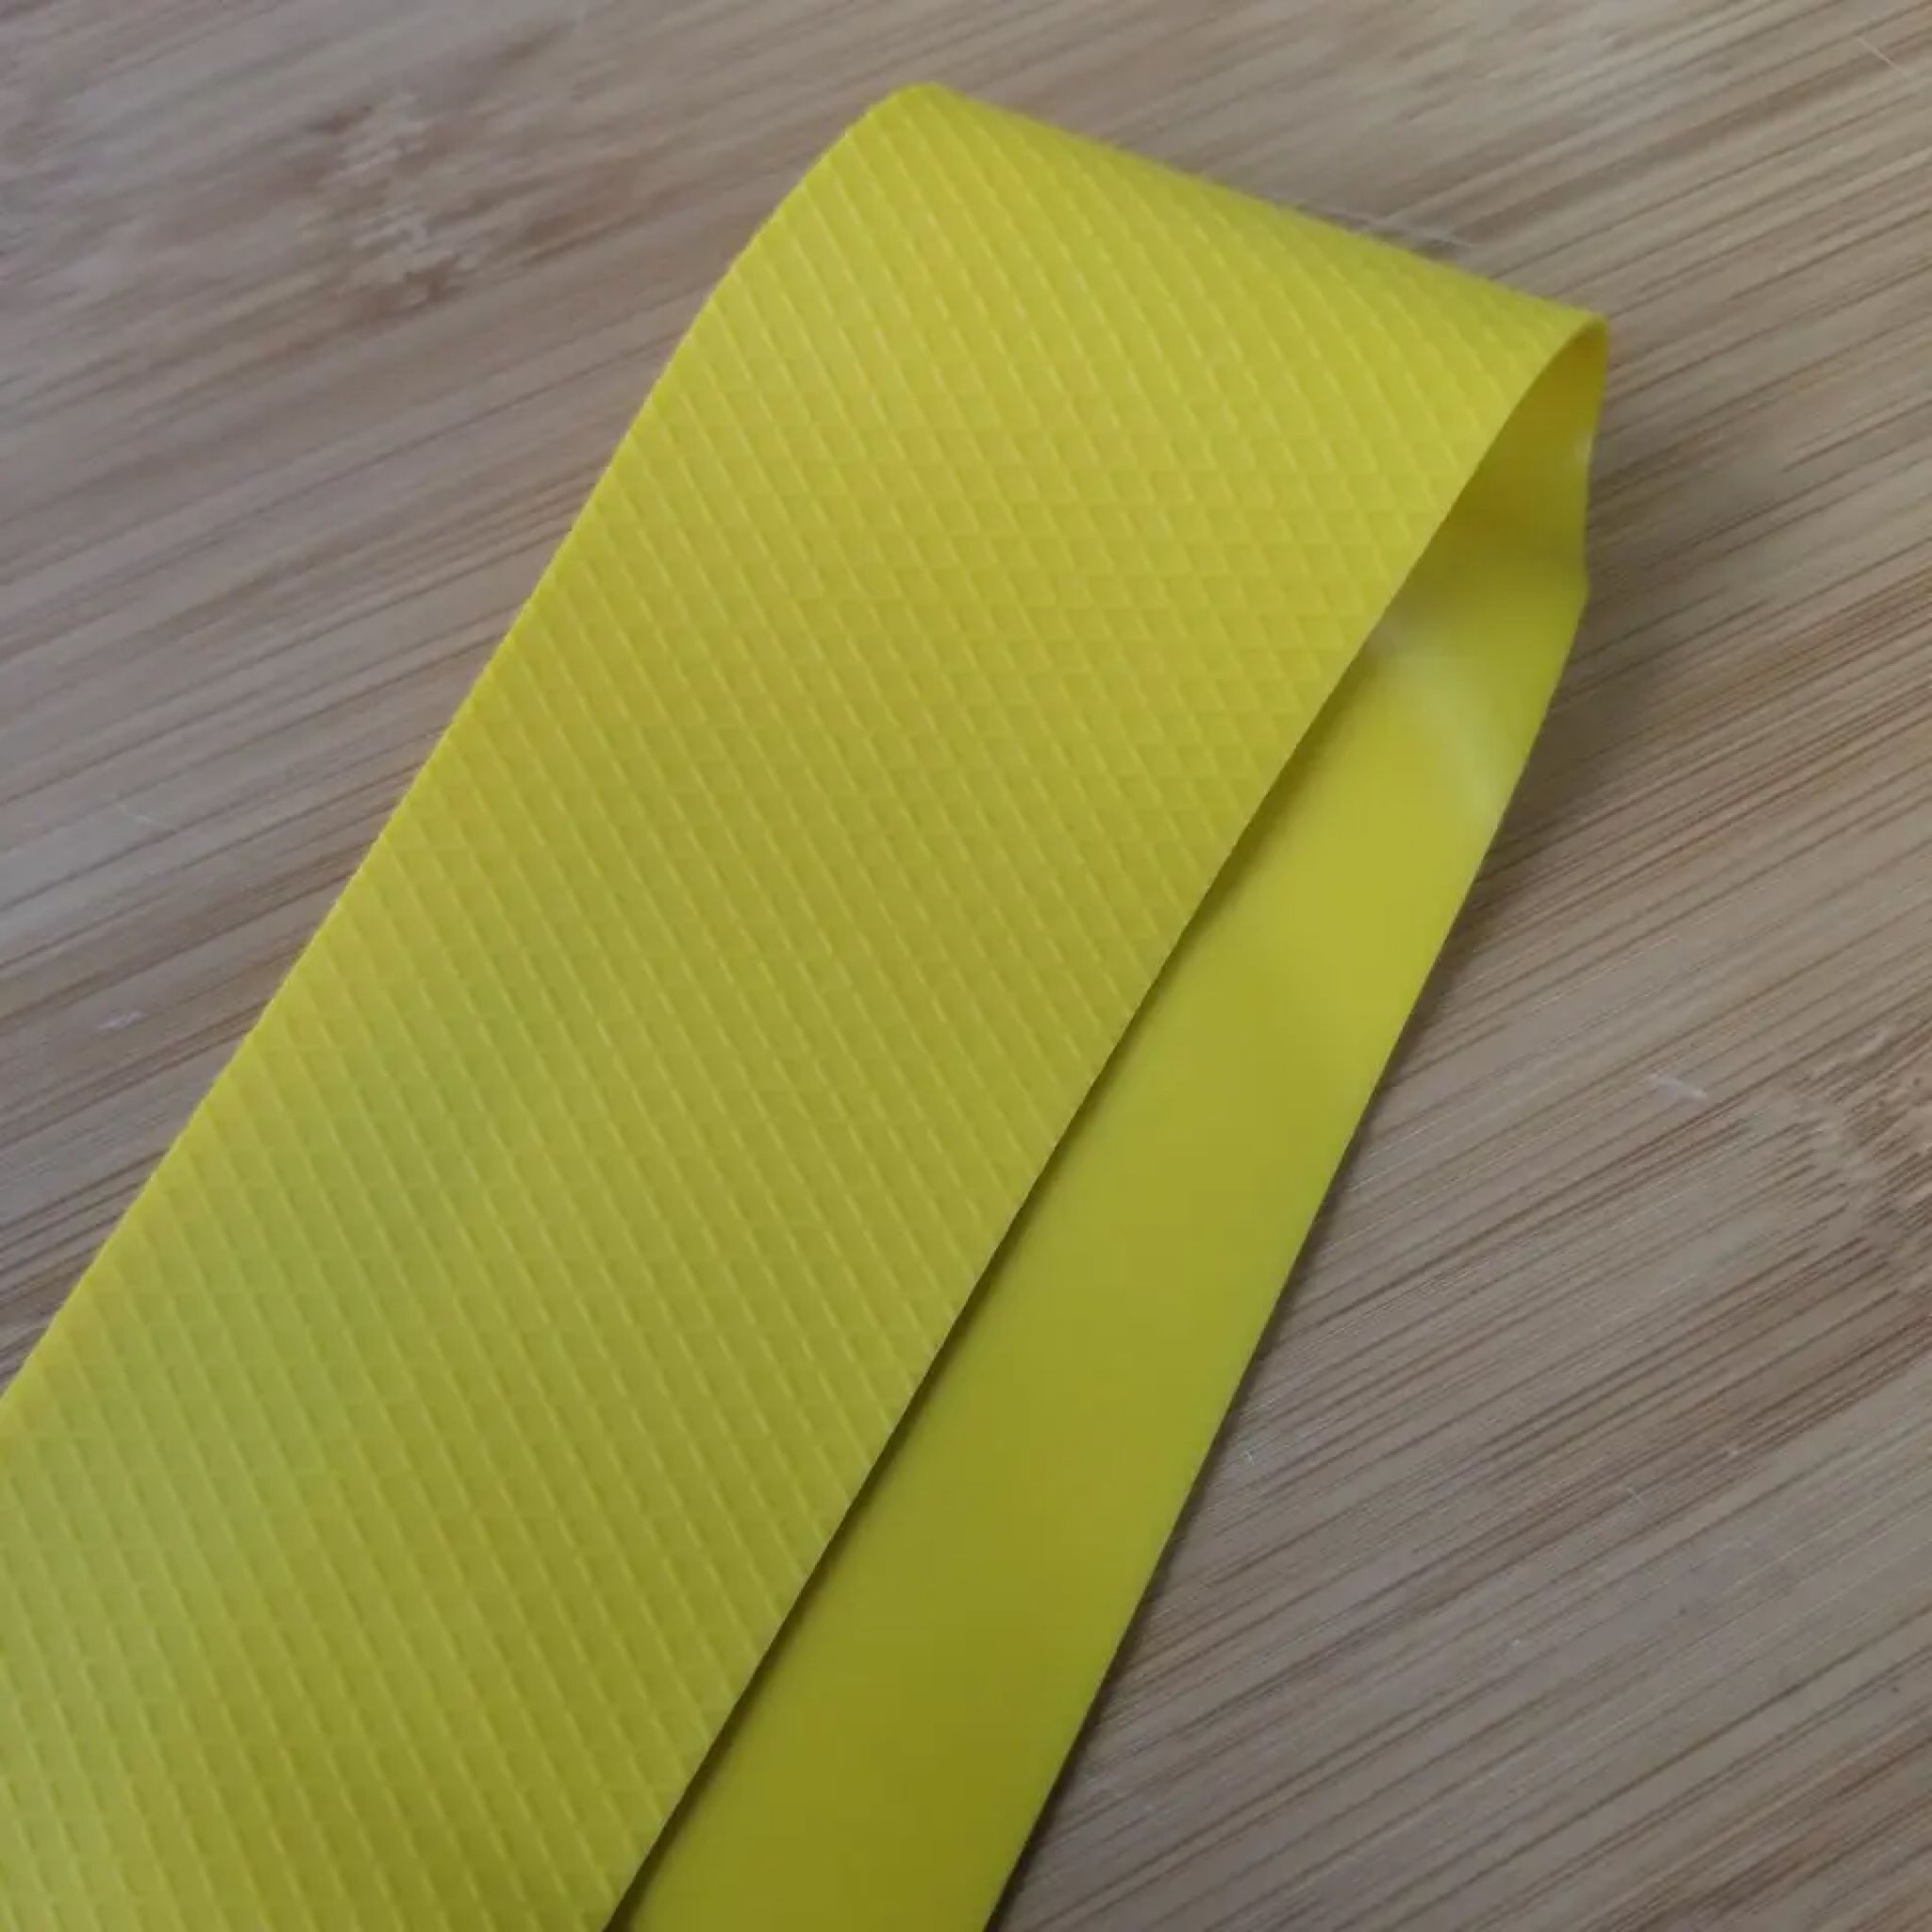 Closeup of the Fold on the Yellow 3D Grip Latex Resistance Band Set